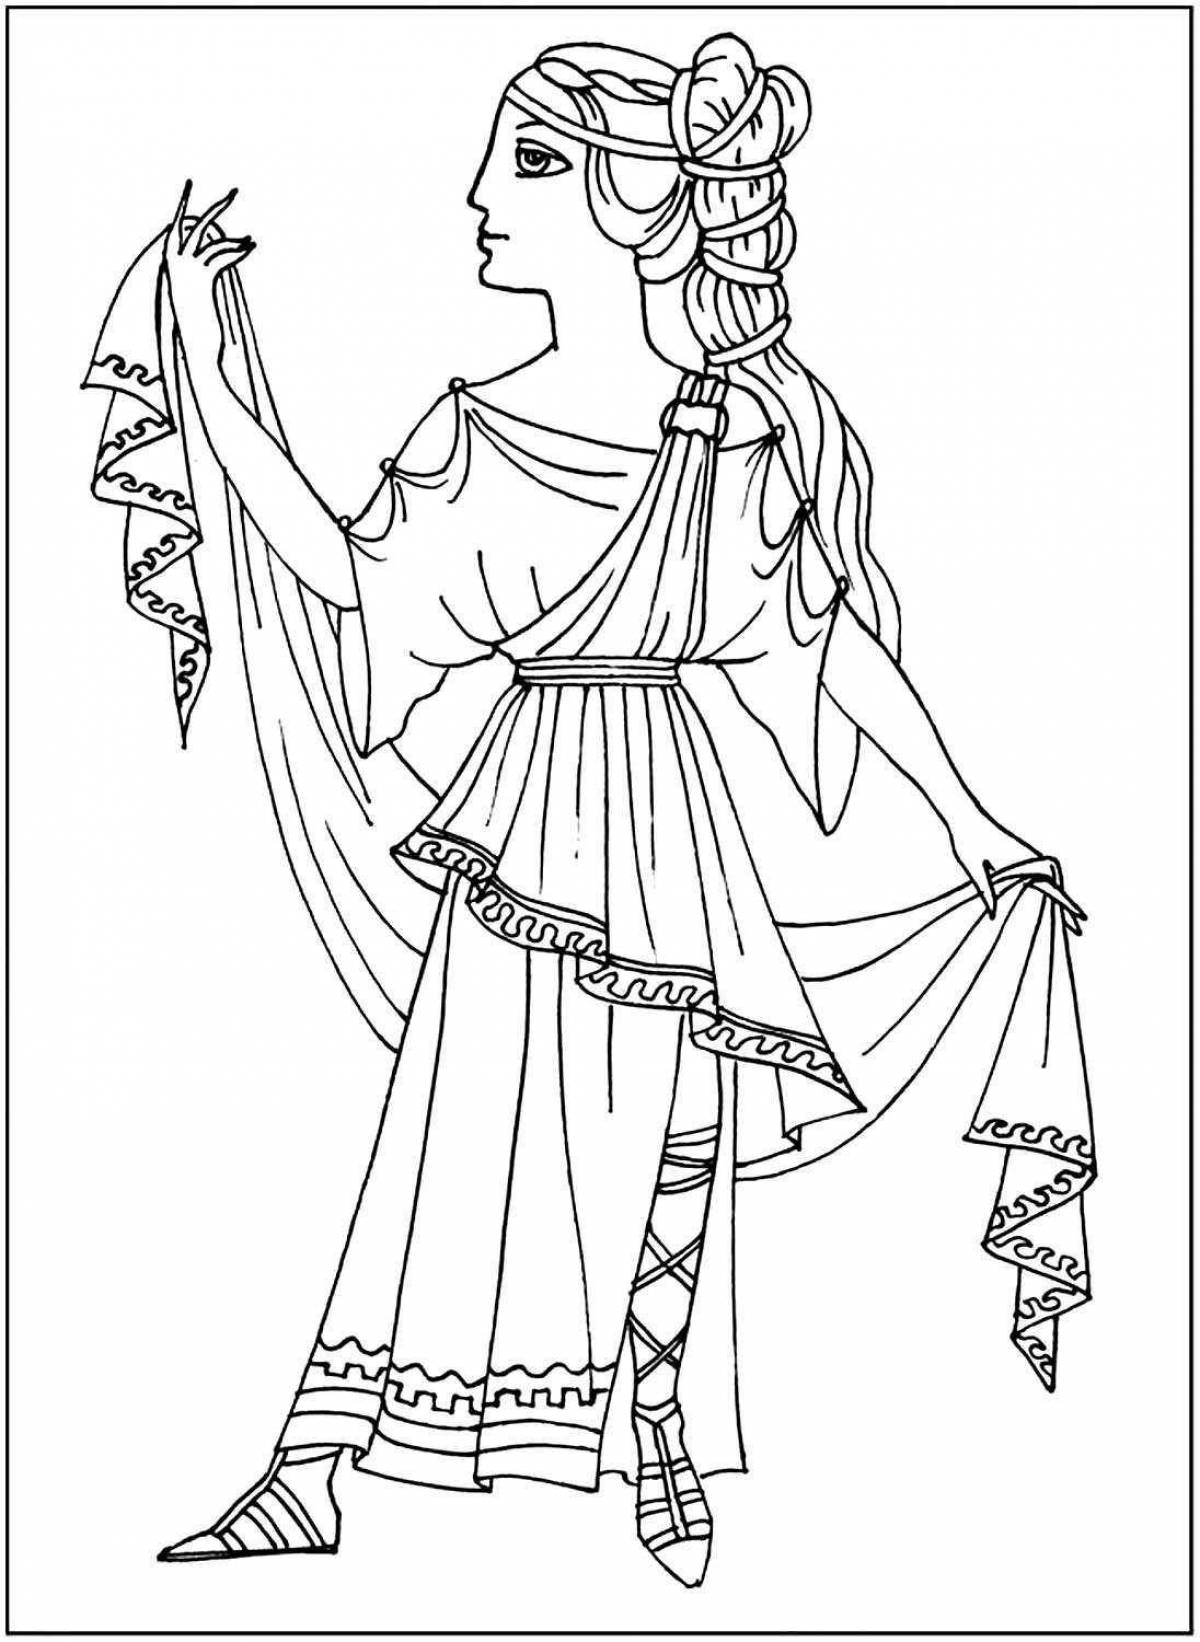 Intriguing coloring of ancient Greek clothes